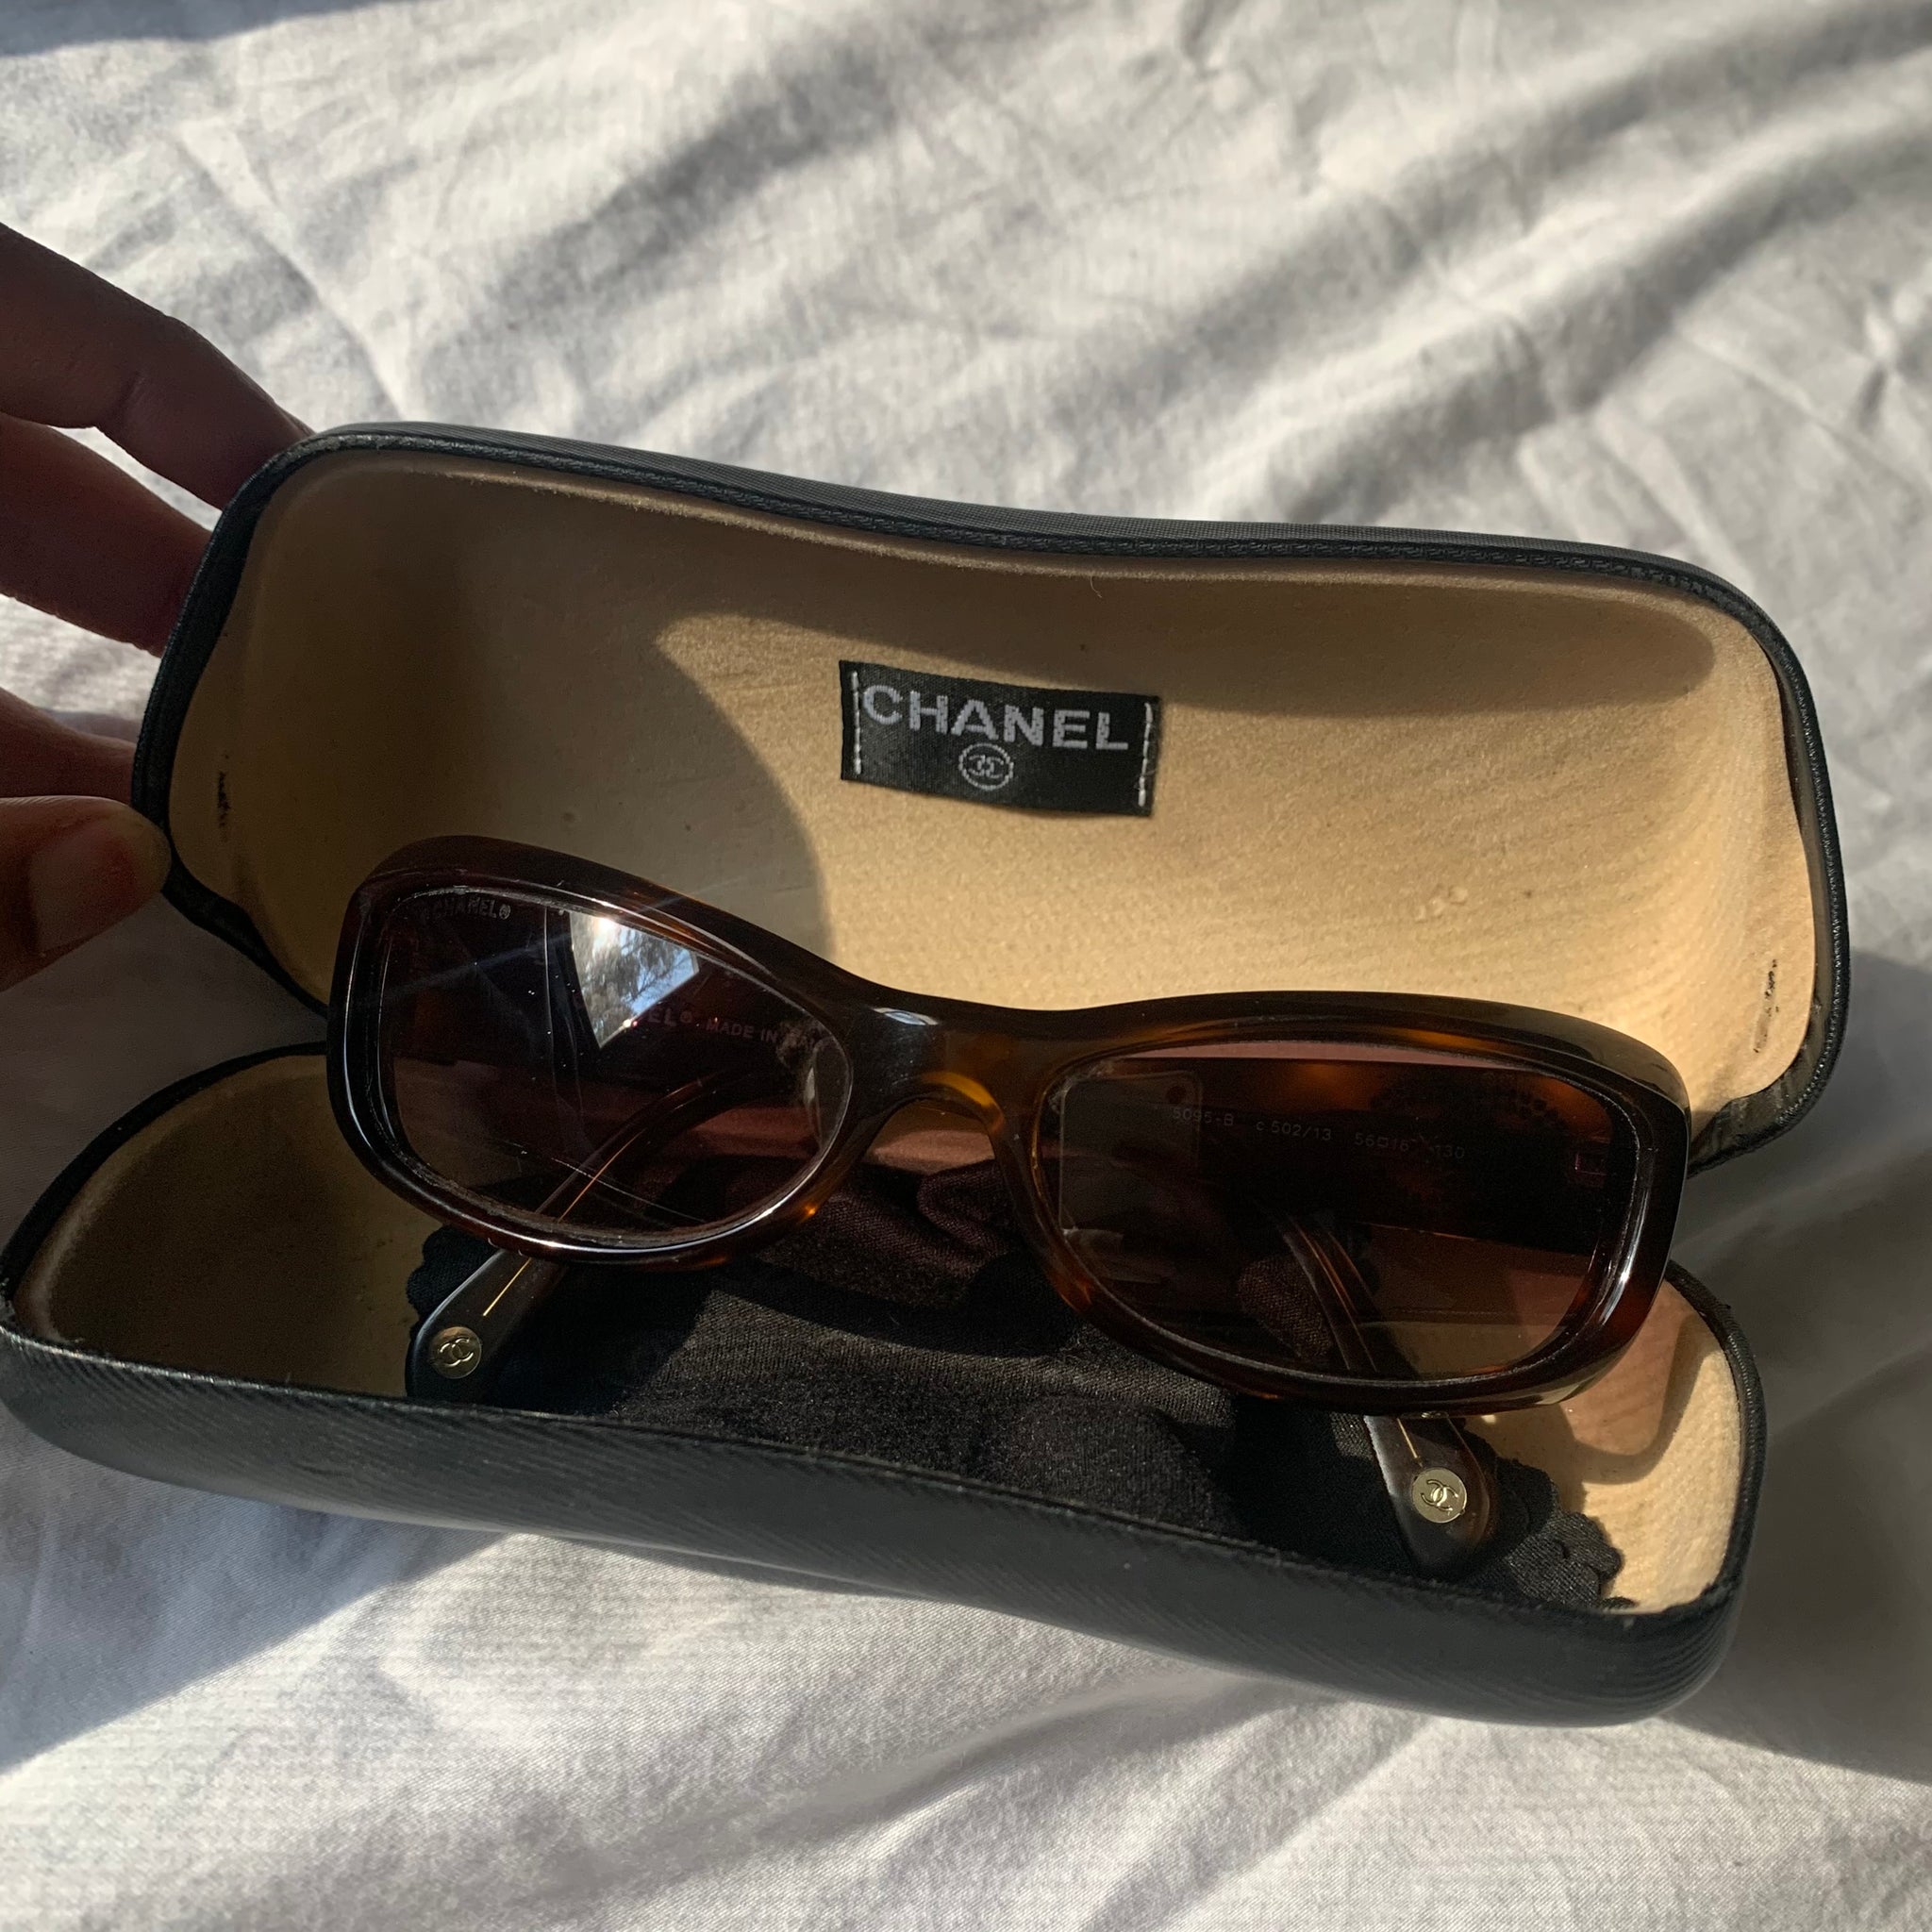 chanel sunglasses with logo on top